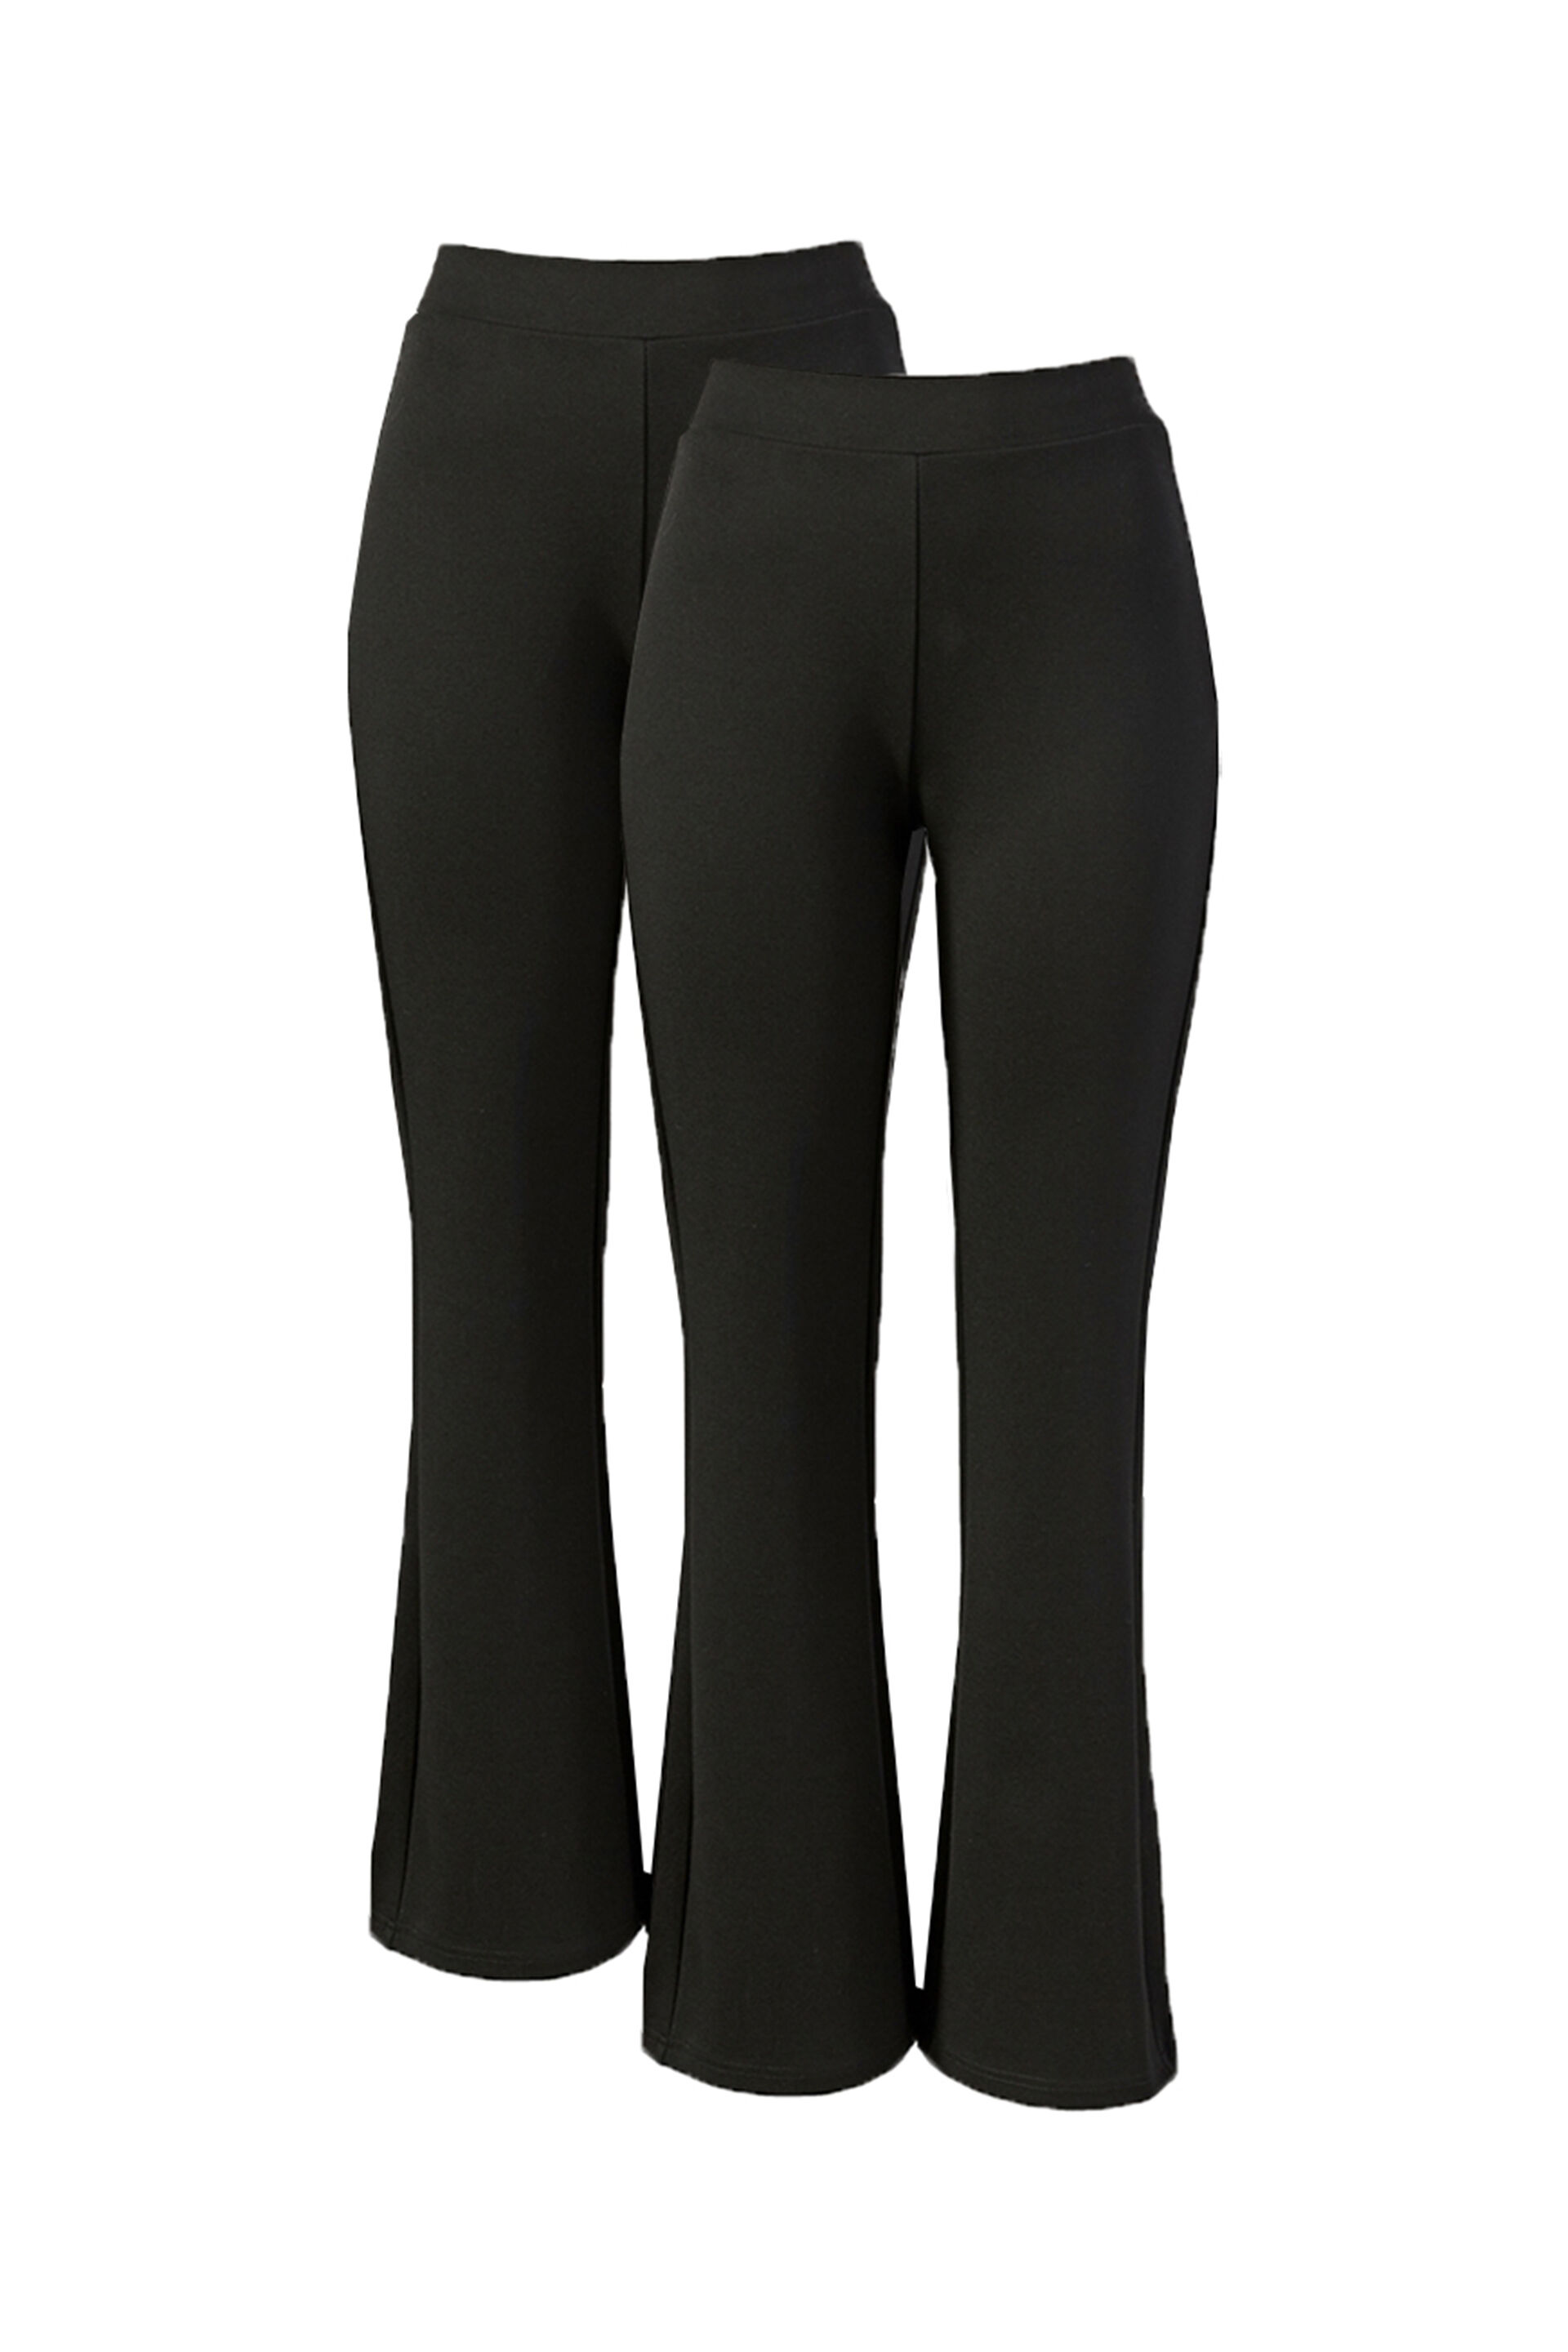 Spacedye All Day Flare High Waisted Pant | Beyond Yoga